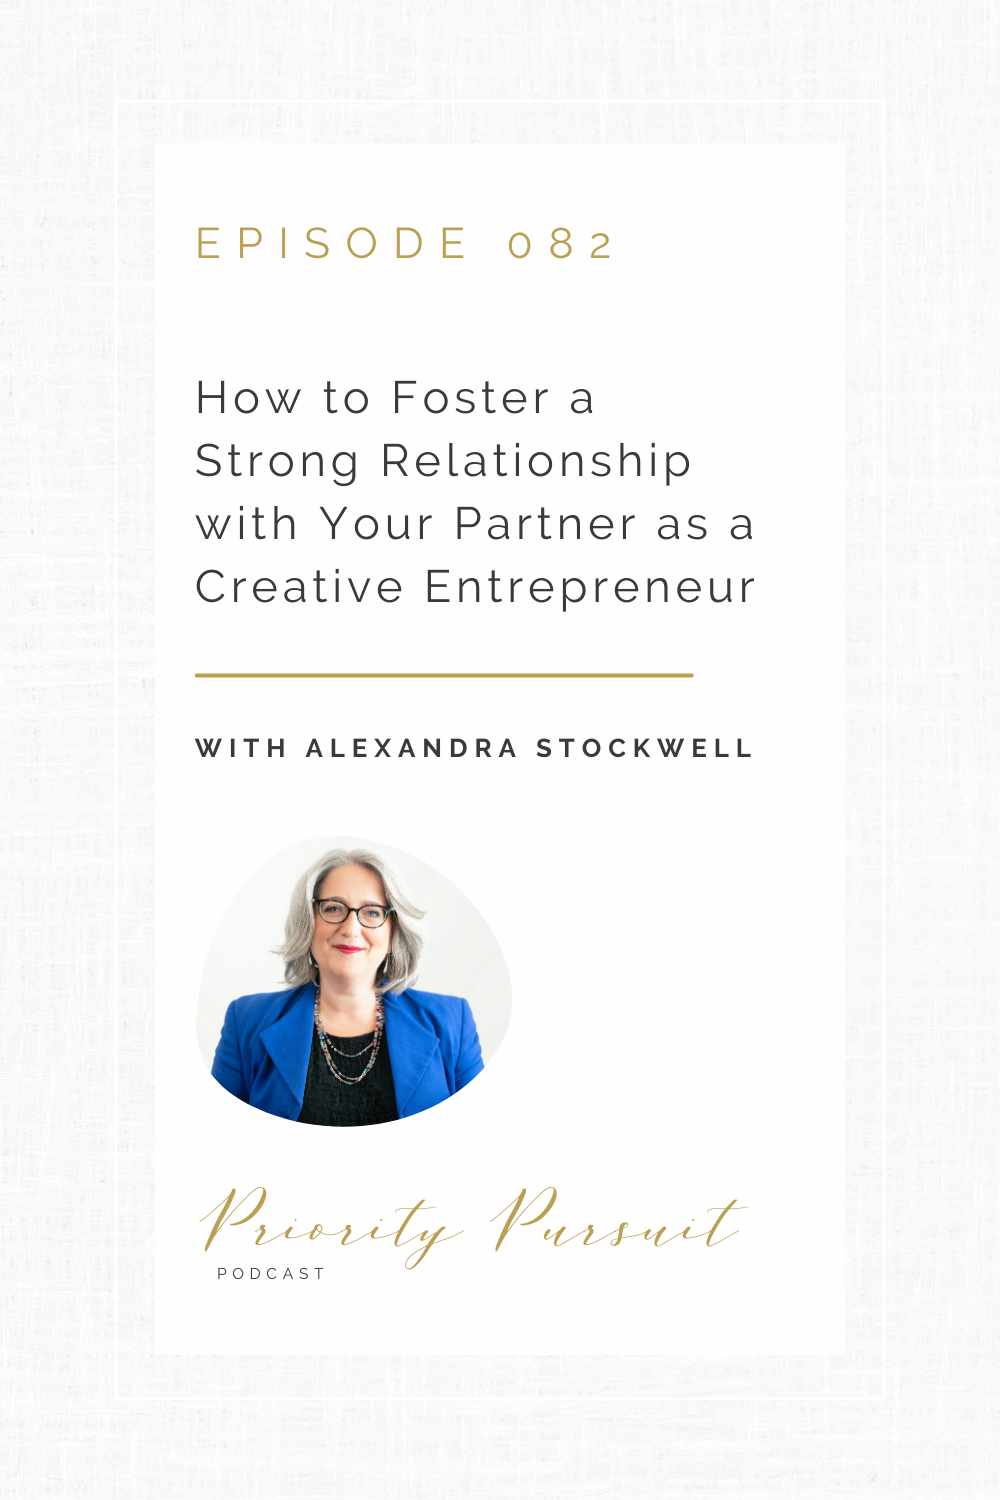 Victoria Rayburn and Dr. Alexandra Stockwell discuss how small business owners can strengthen their relationships with their partners.